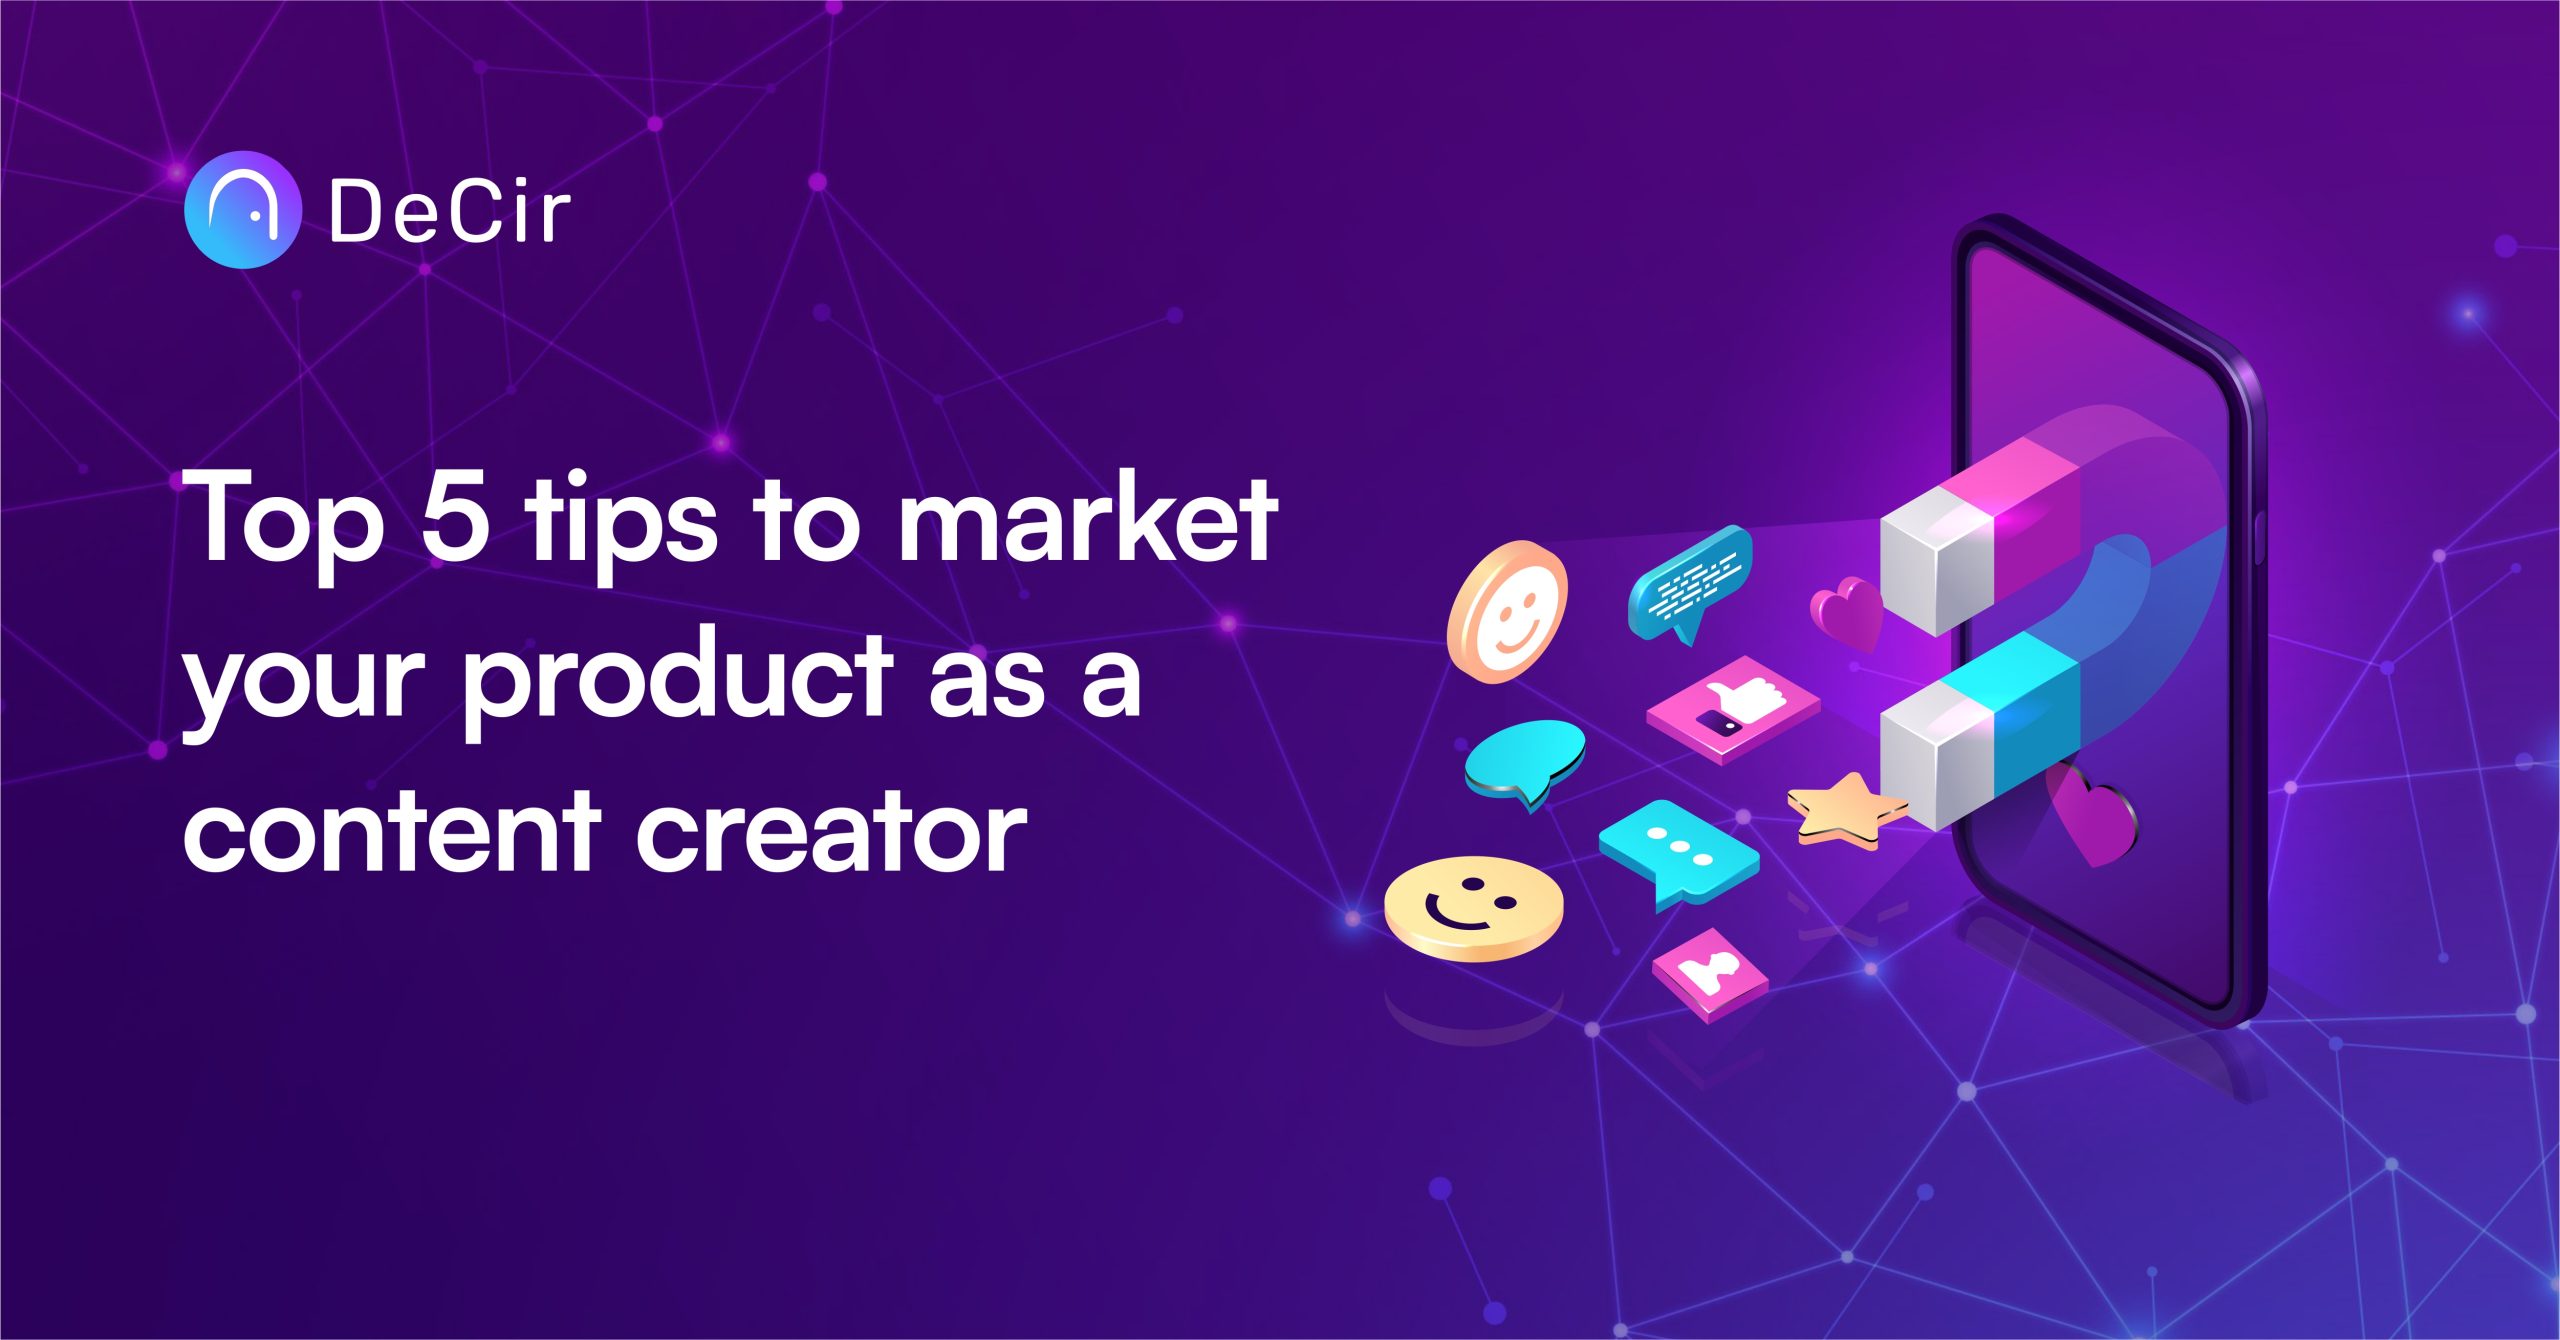 Top 5 tip to market your product as a content creator